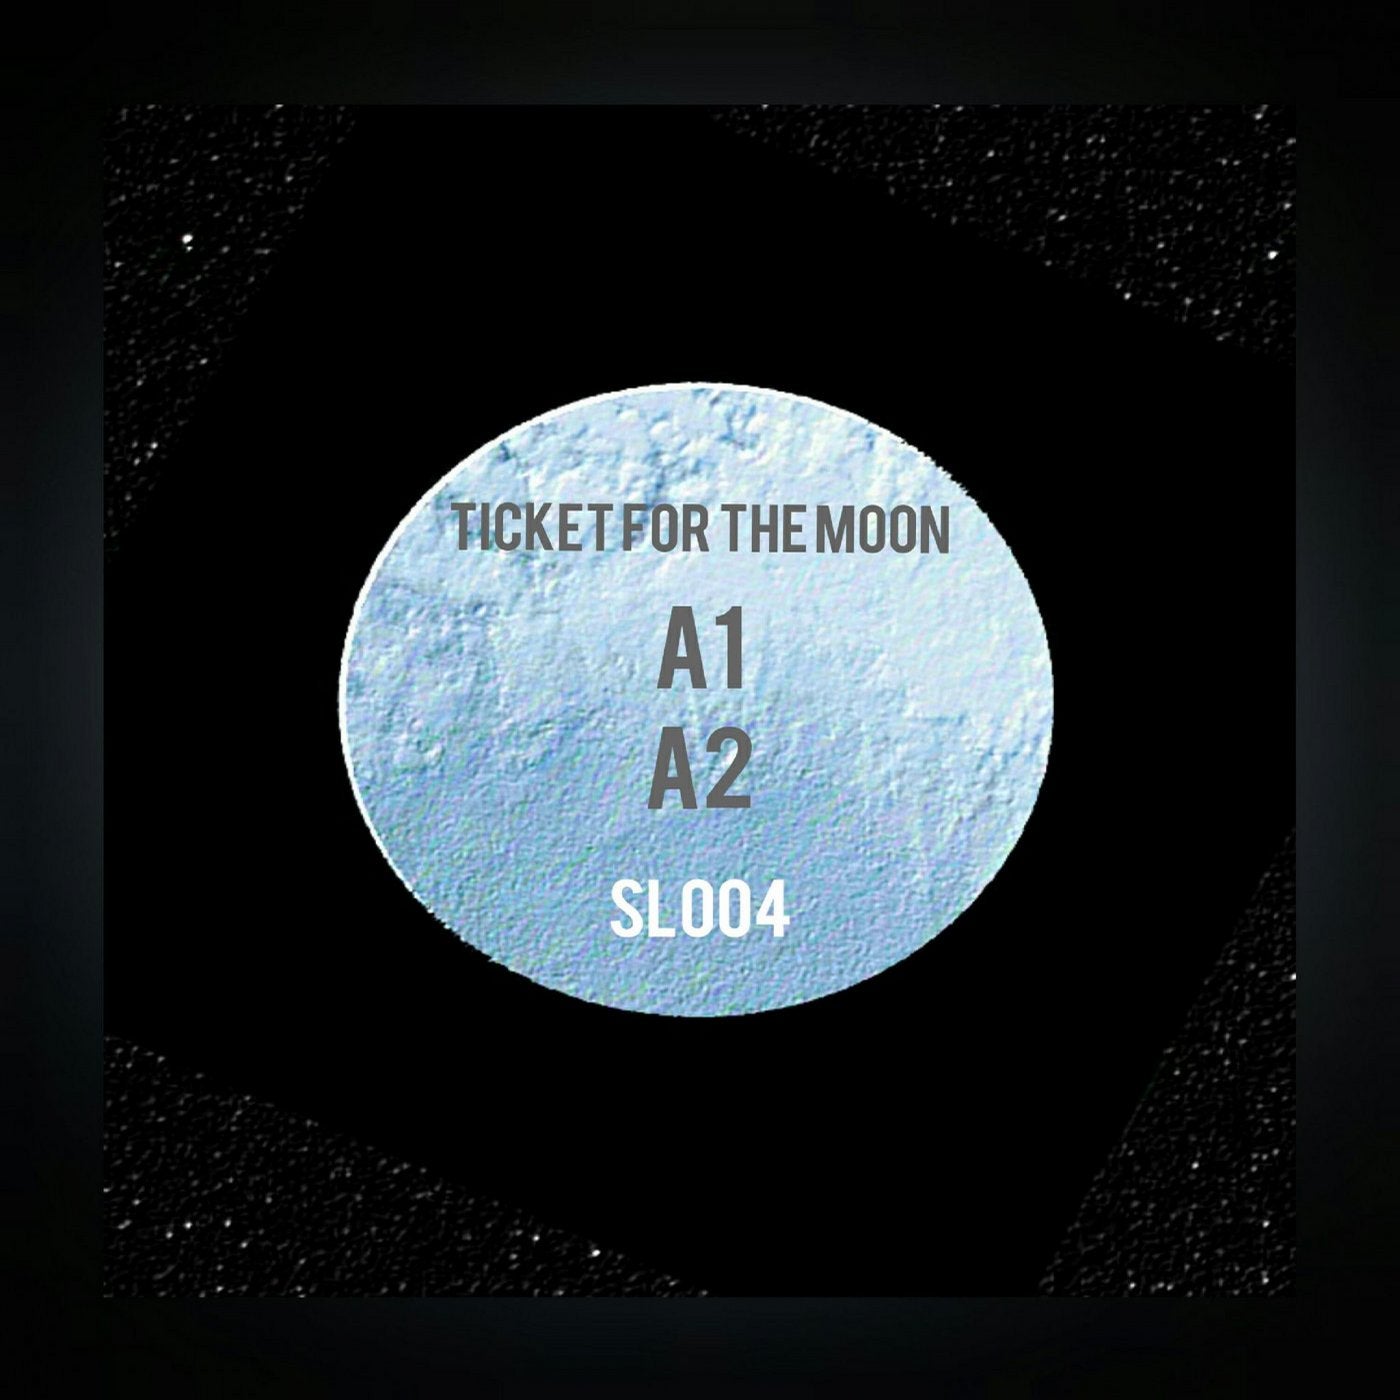 Ticket for the moon